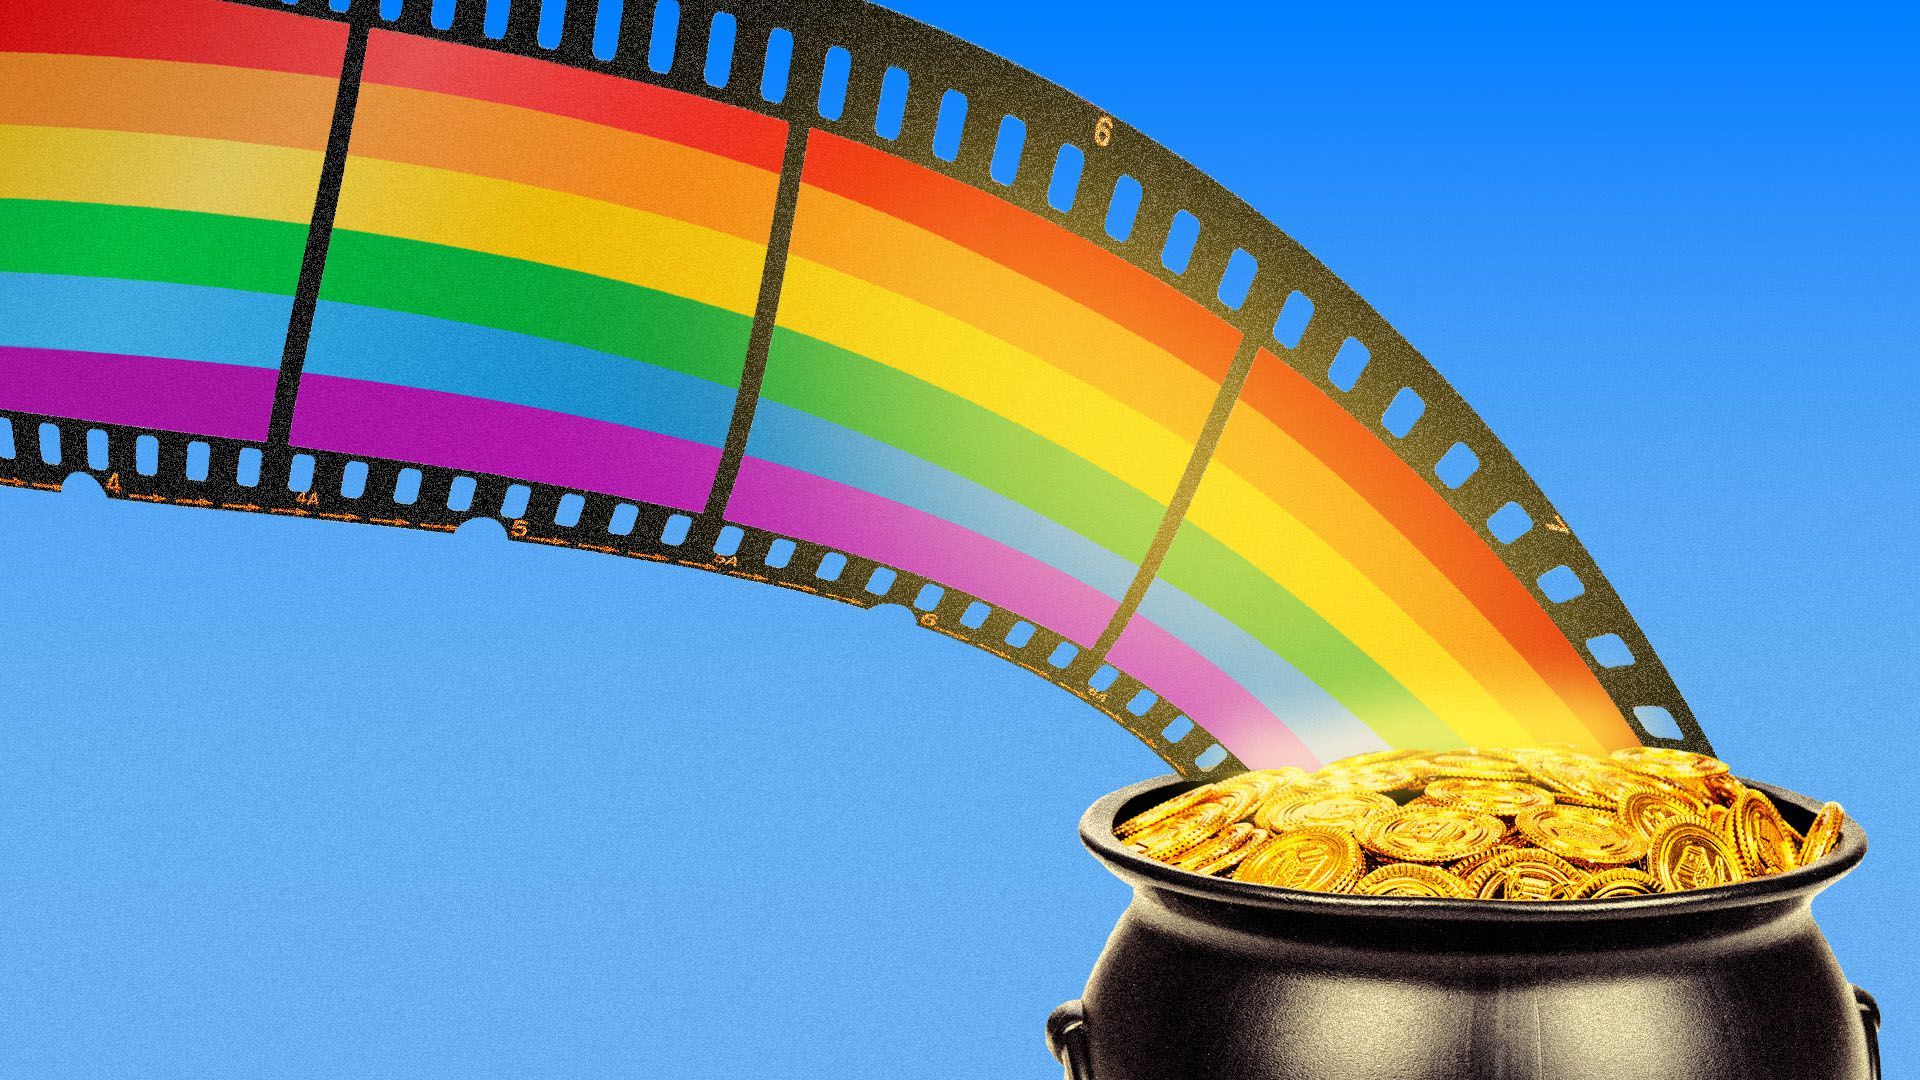 Illustration of a rainbow made from a film strip, ending in a pot of gold.